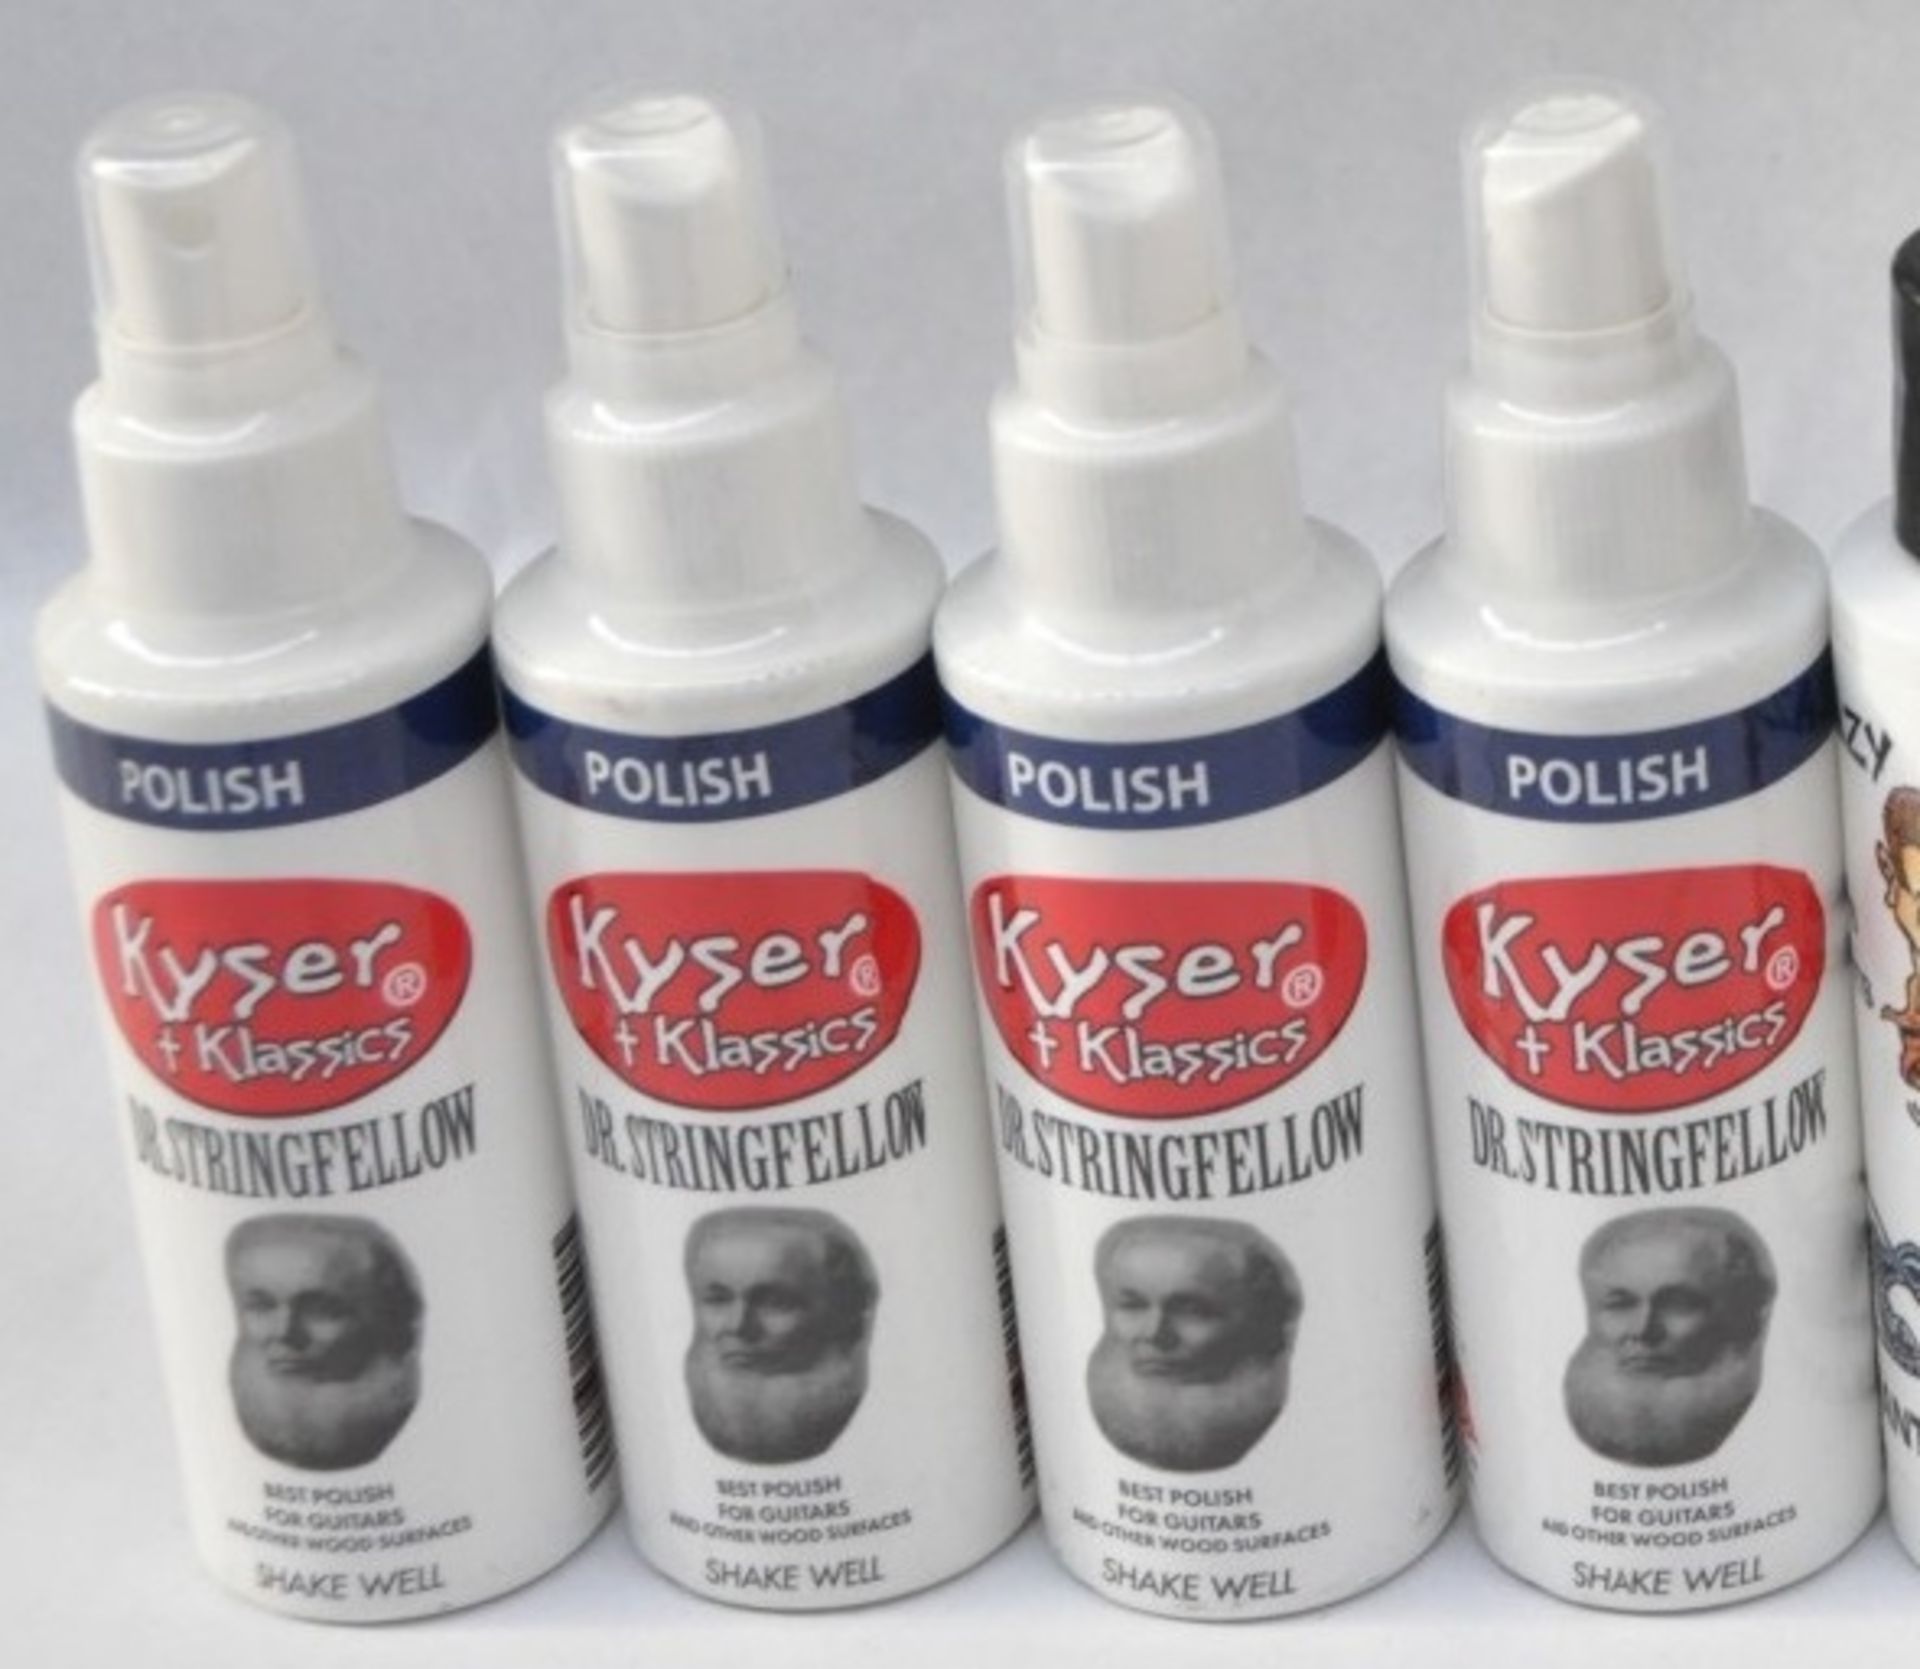 4 x Kyser Dr Stringfellow Guitar Polish - Deep Cleaning Polish Protects Wood Finishes and Even